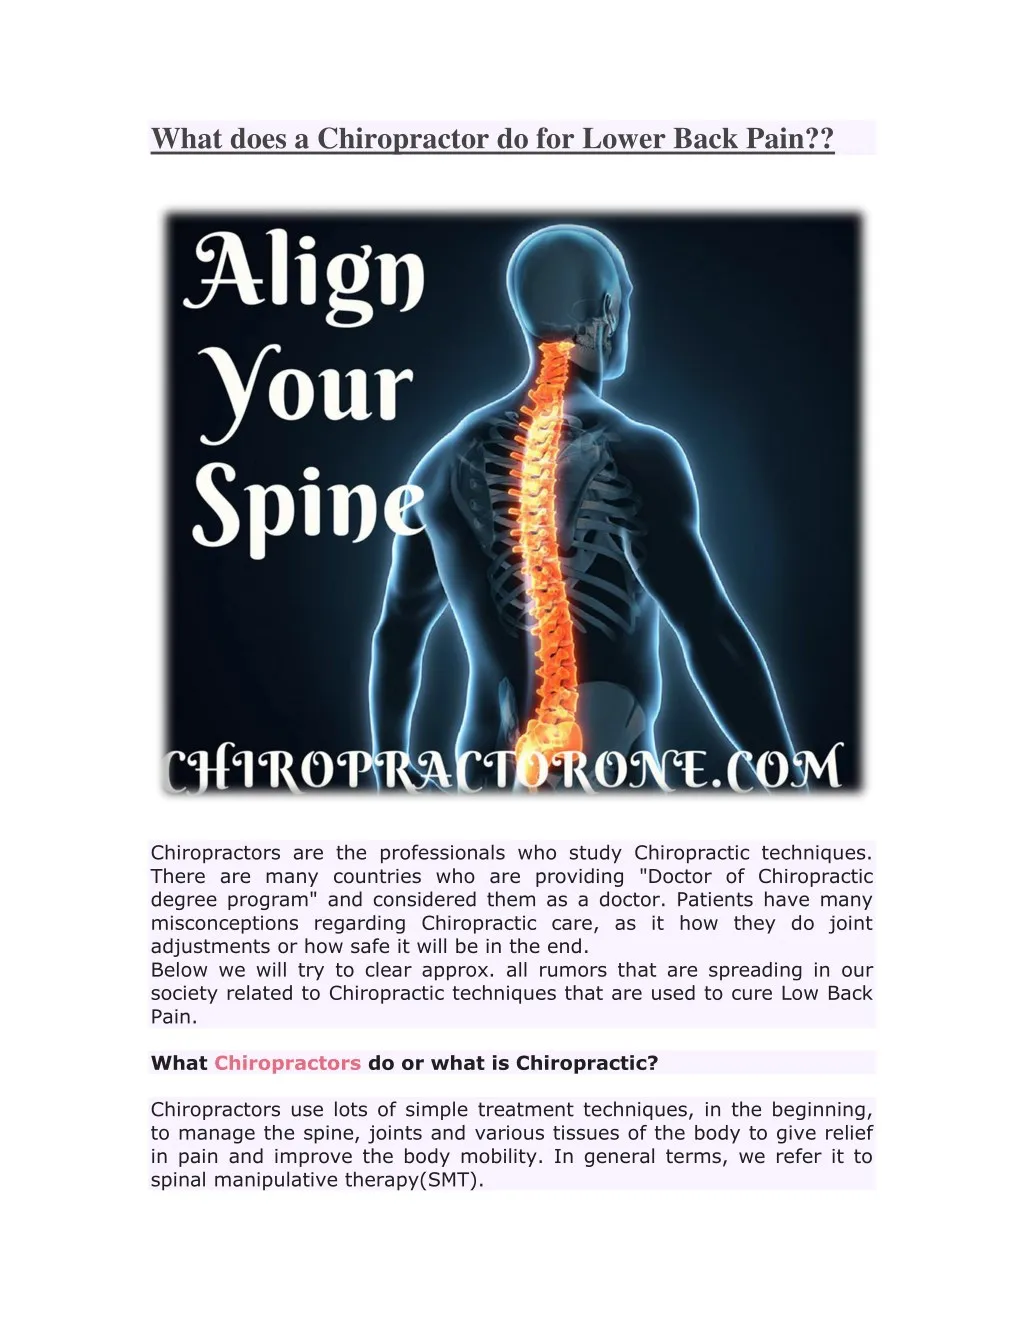 what does a chiropractor do for lower back pain